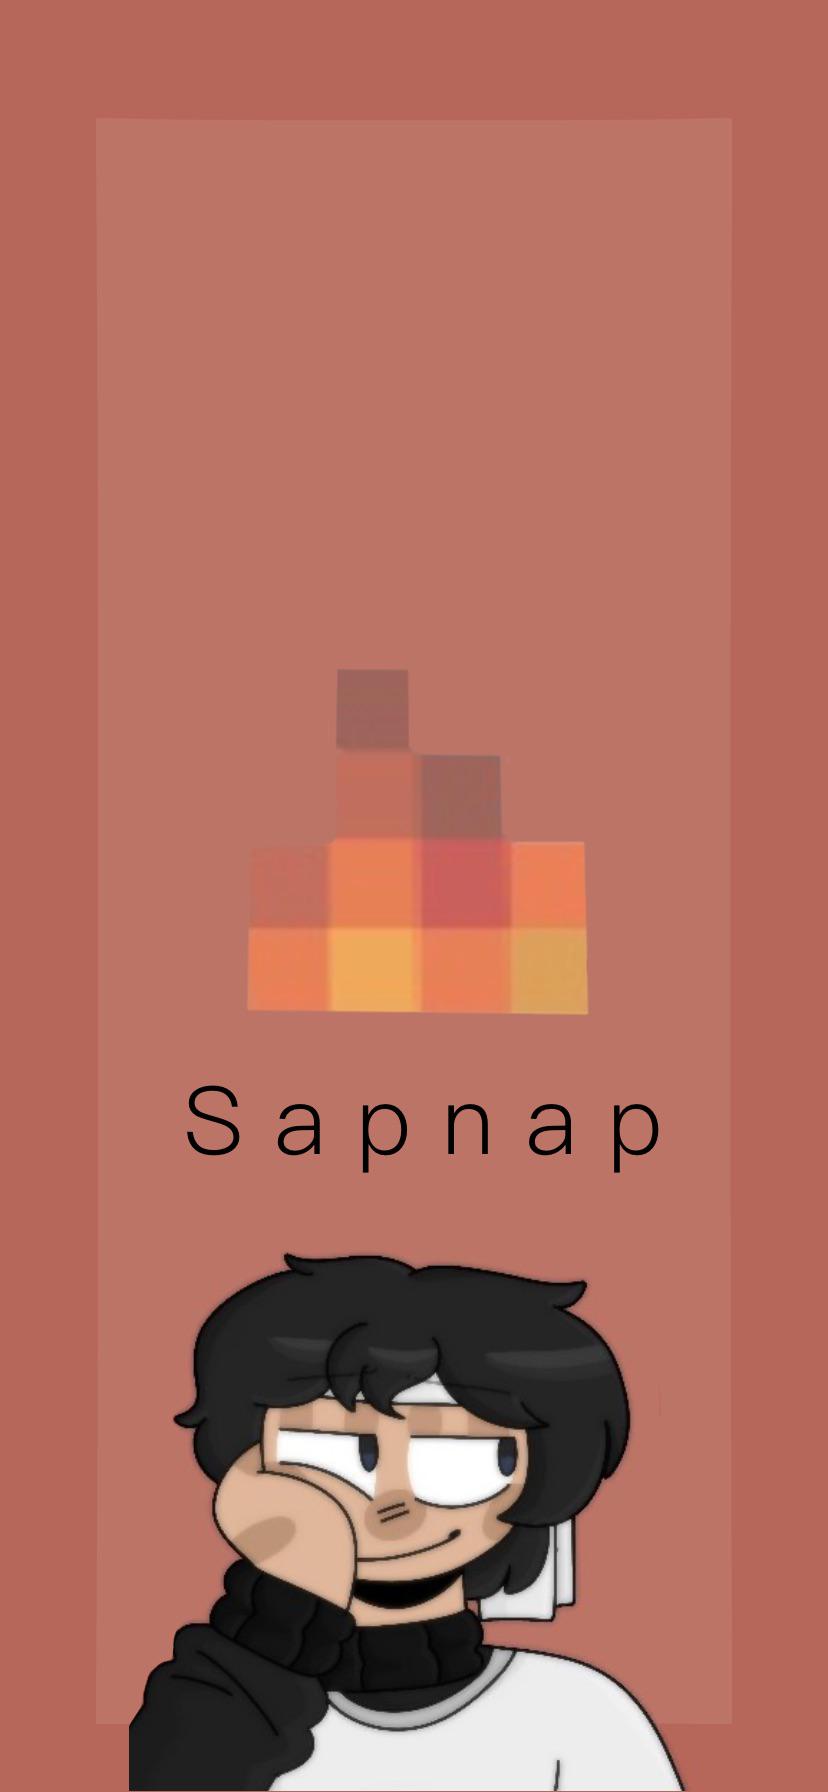 I made I simple Sapnap iPhone wallpaper you're welcome to use!! I also made a dream and George wallpaper I posted lithe mom the dream subreddit! :)